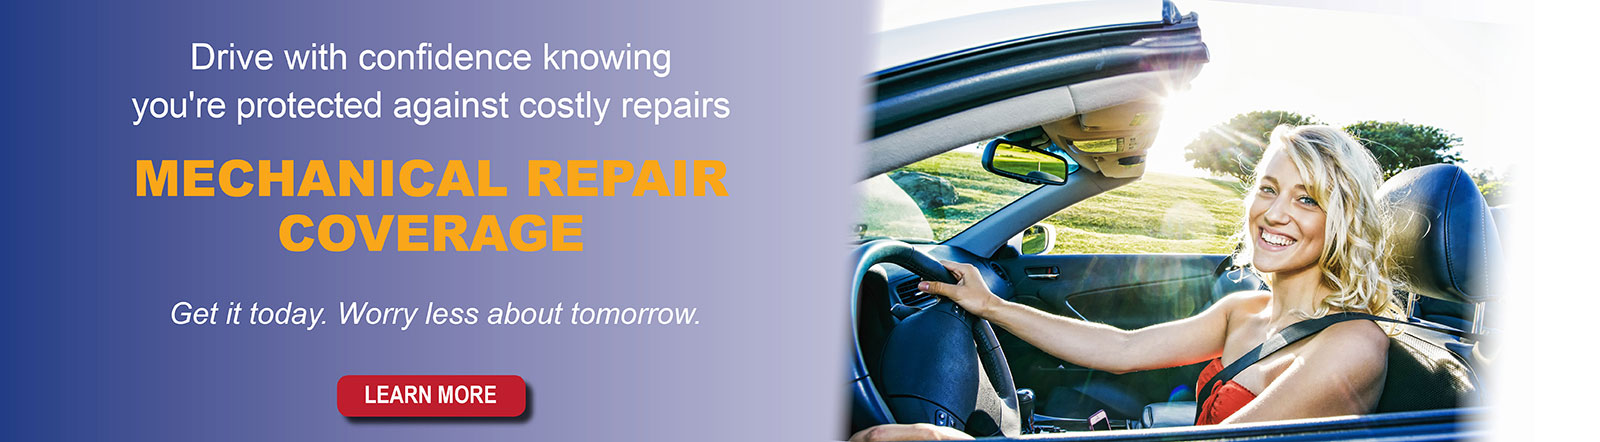 Drive with confidence knowing you're protected against costly repairs with Mechanical Repair Coverage